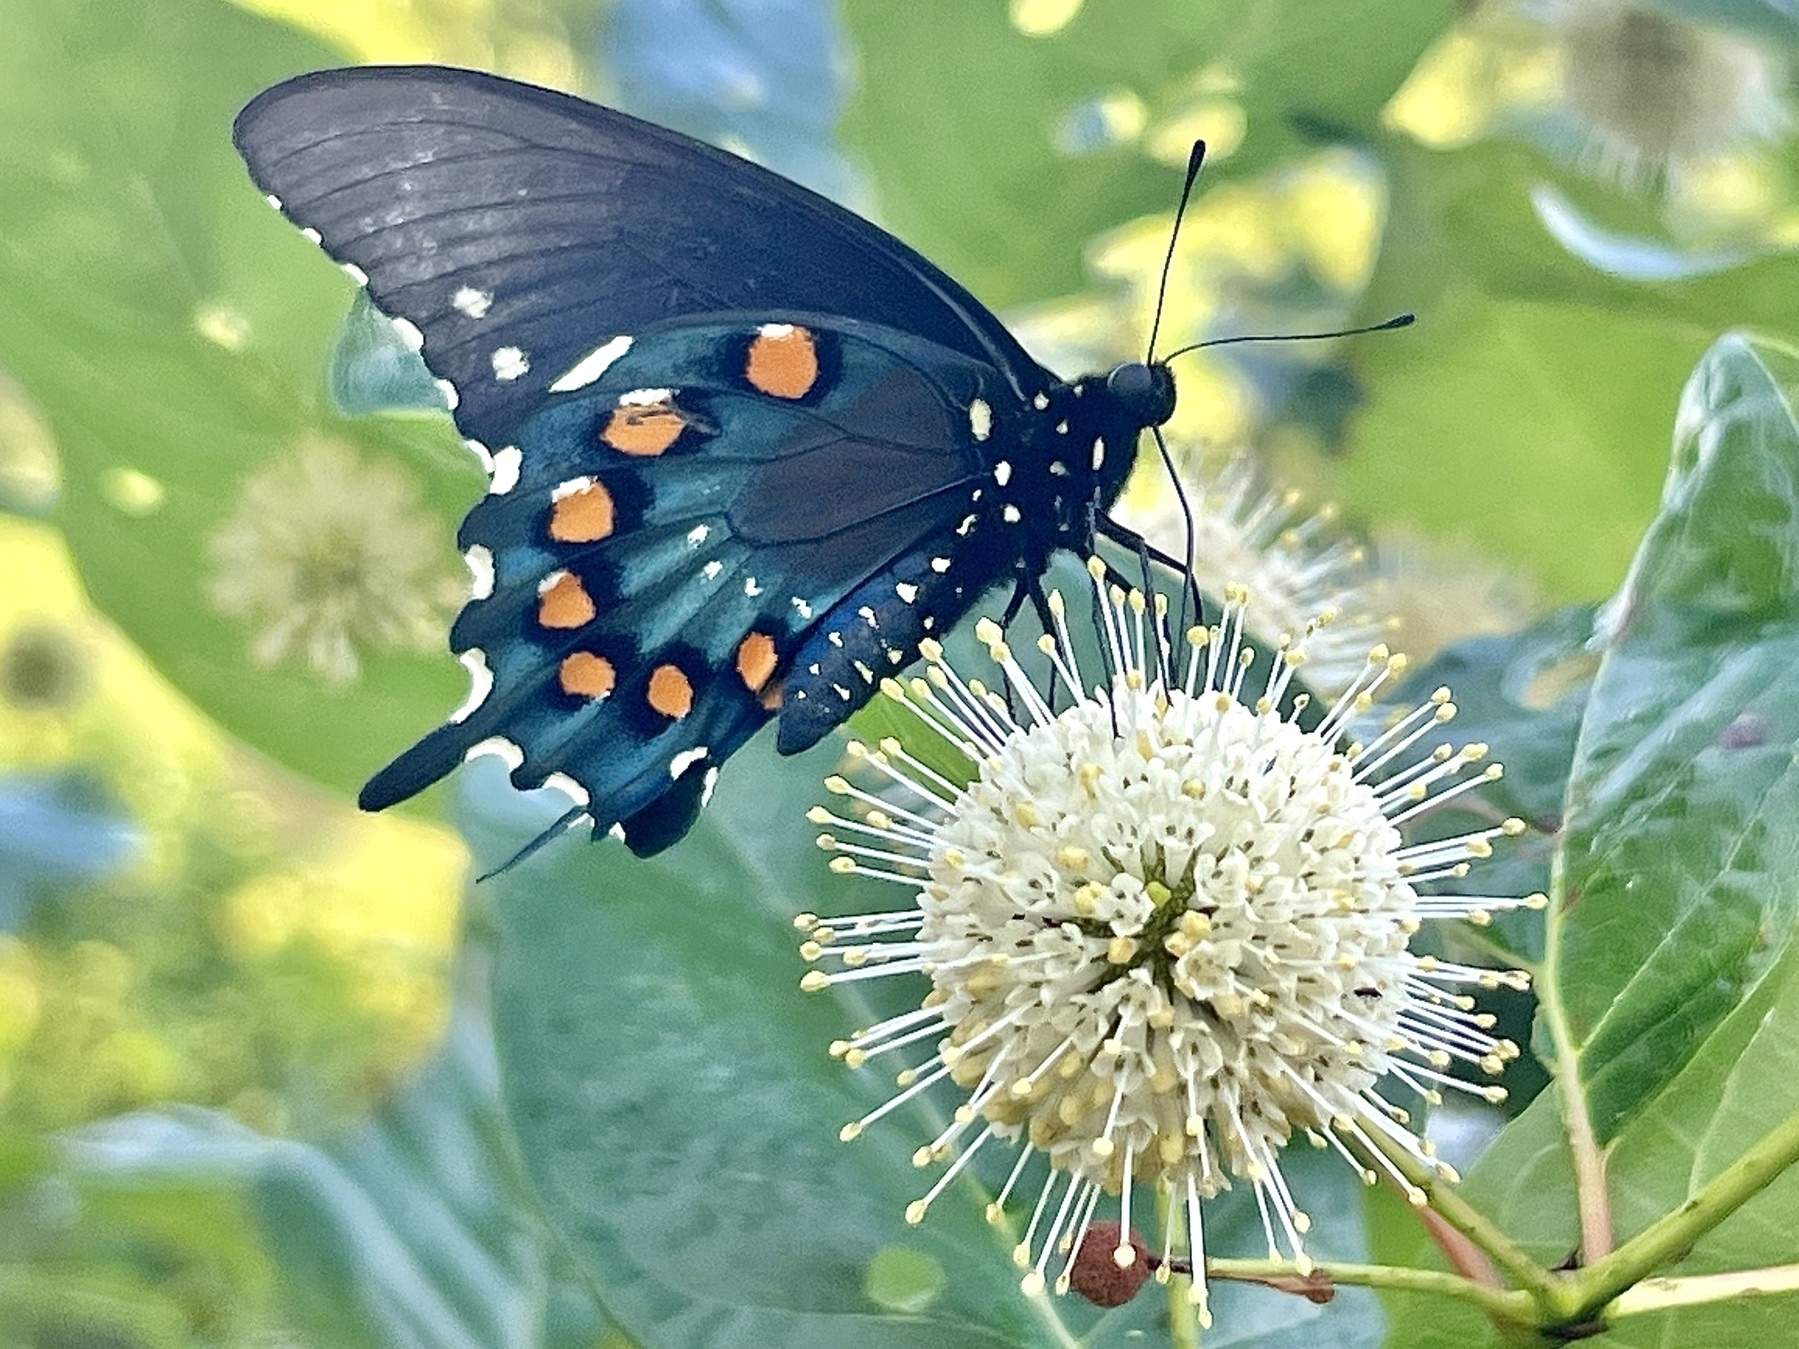 A predominately black butterfly with orange spots along its wings is perched on a cream colored ball that is covered with delicate white stems, each topped with yellow.